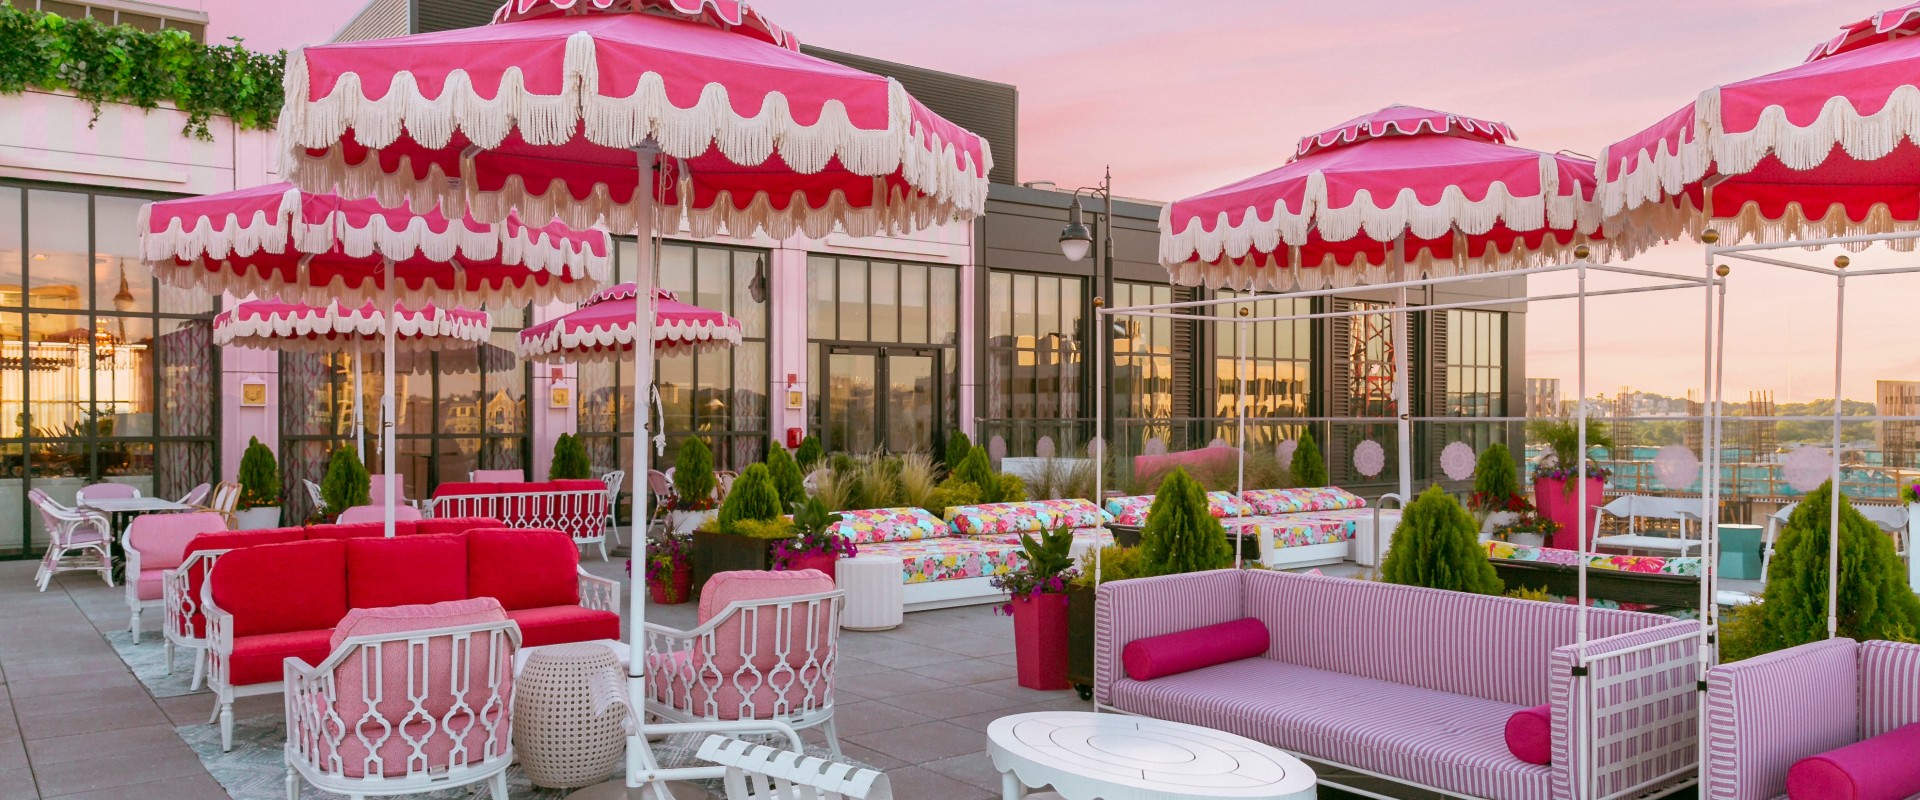 The Best Rooftop Bars in Nashville, Tennessee